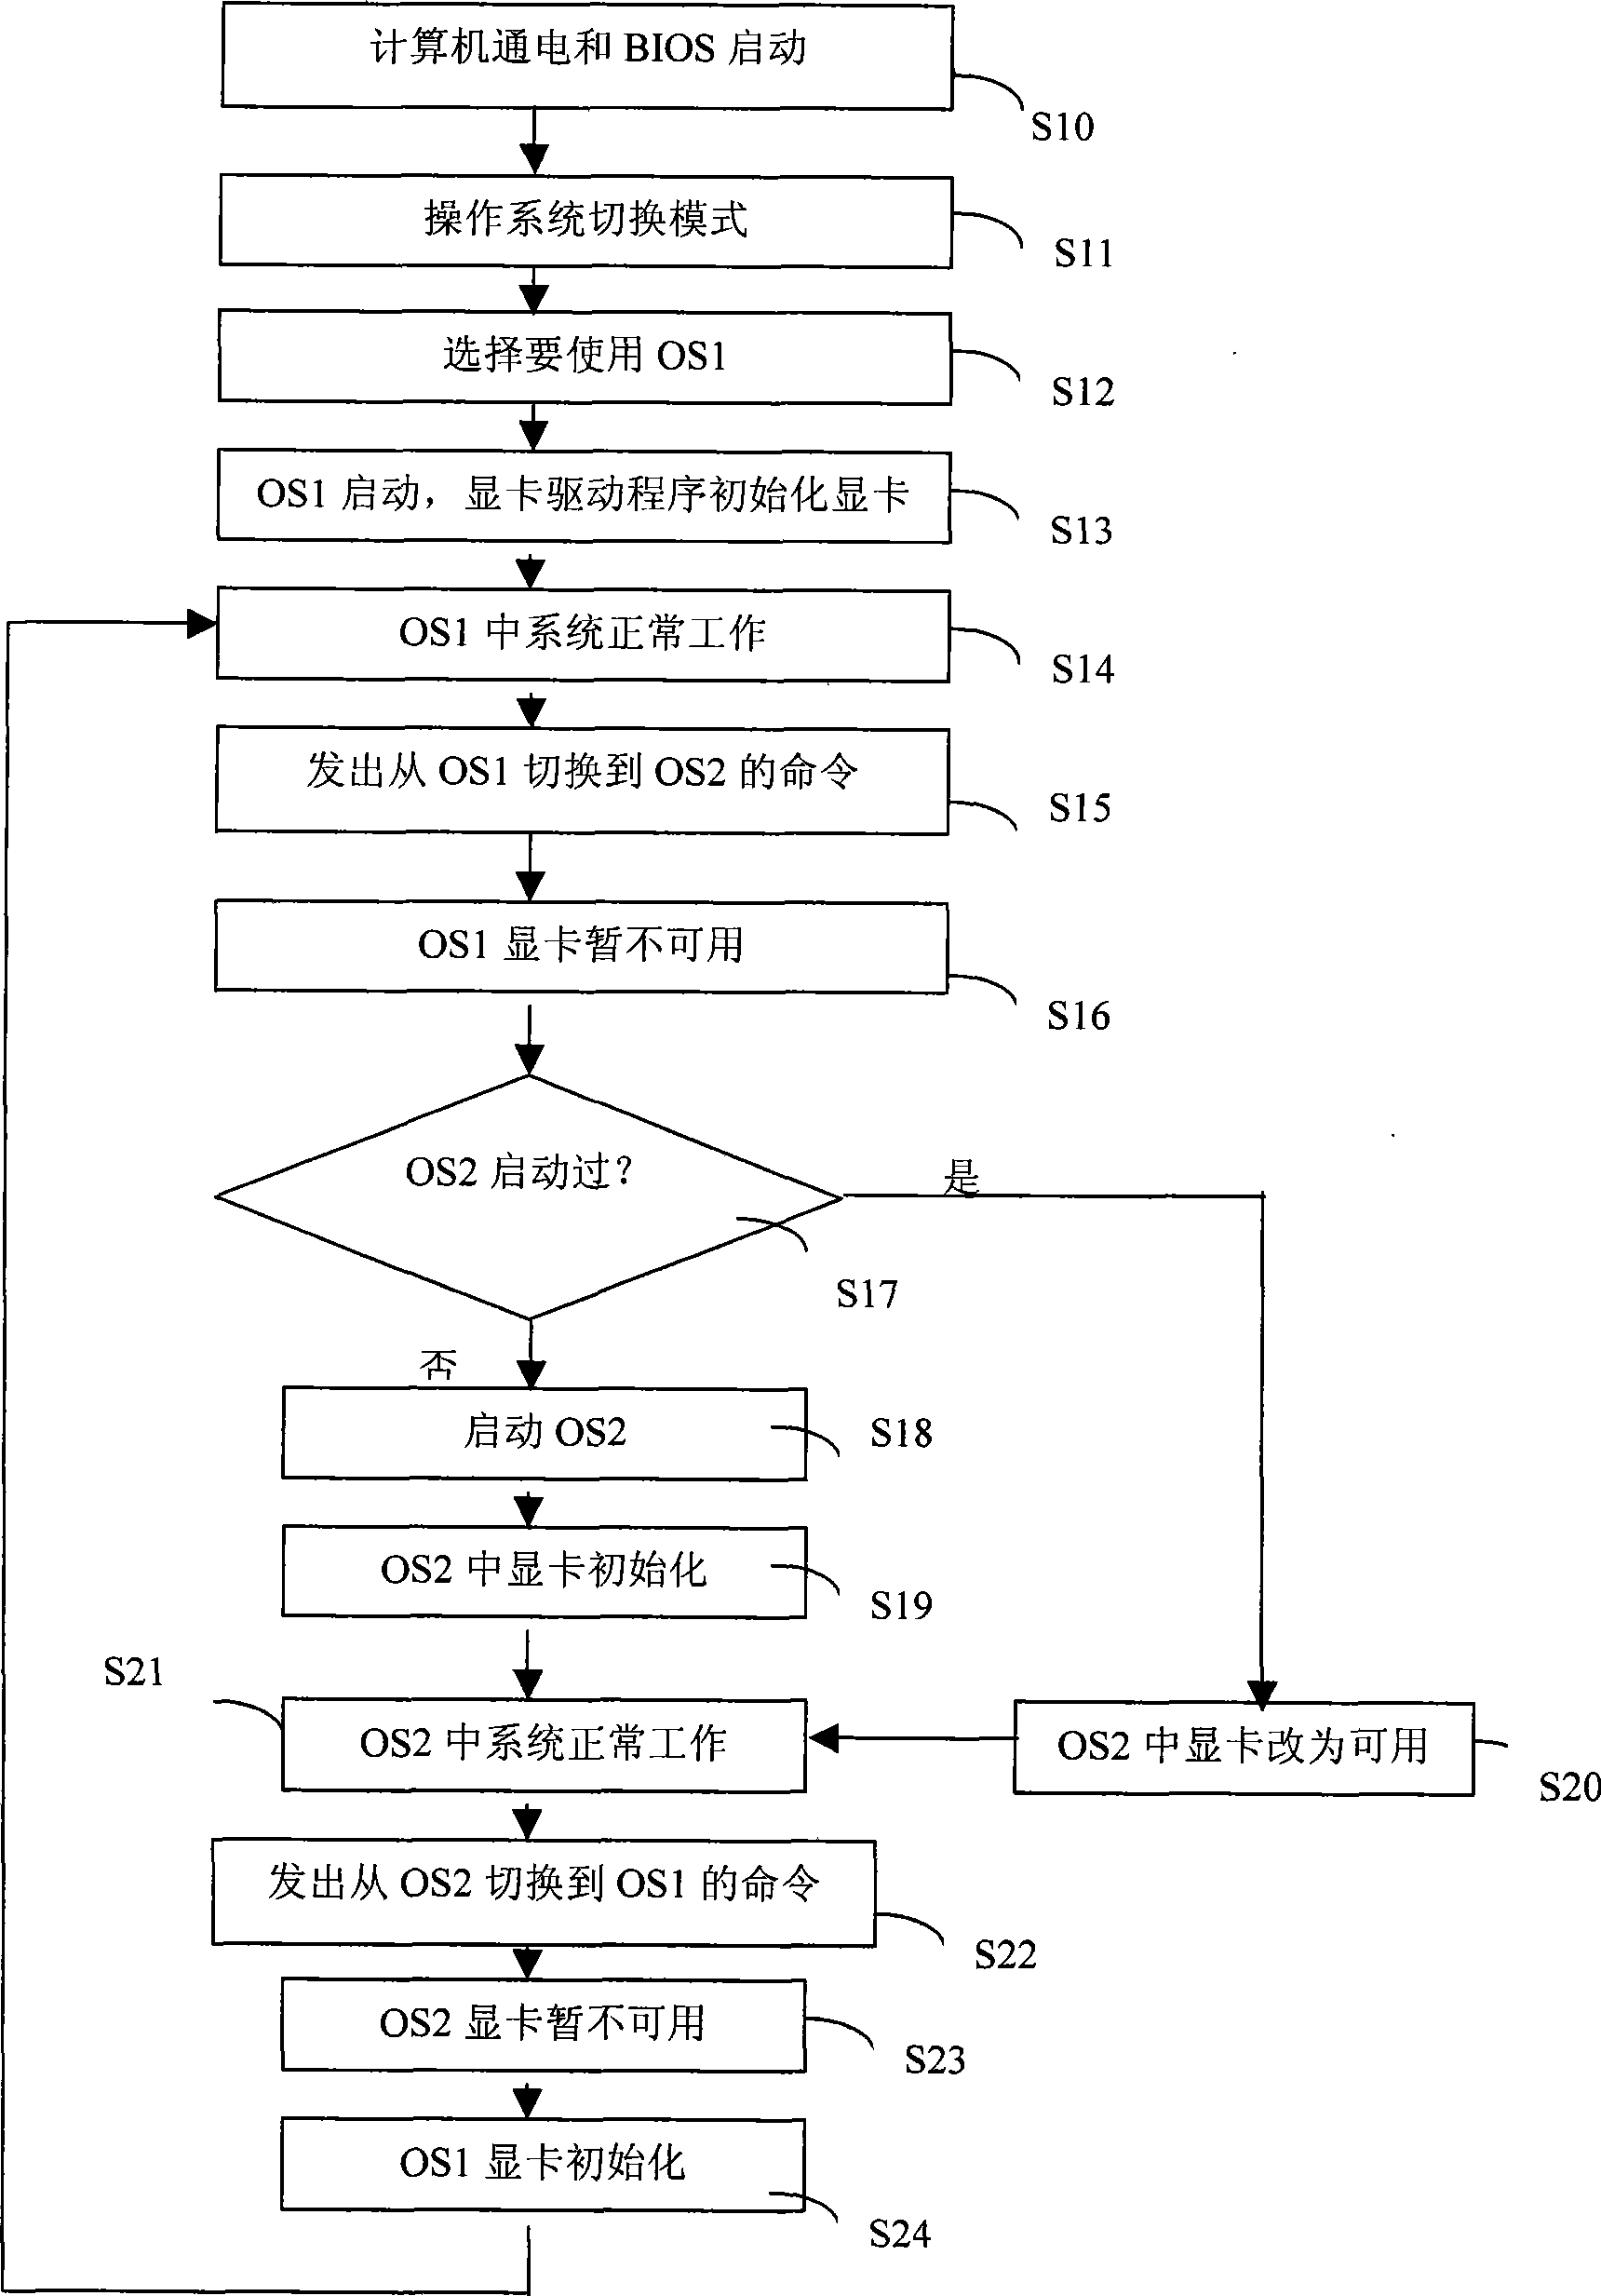 Method for time-sharing using fixed t peripheral device for multiple operating systems